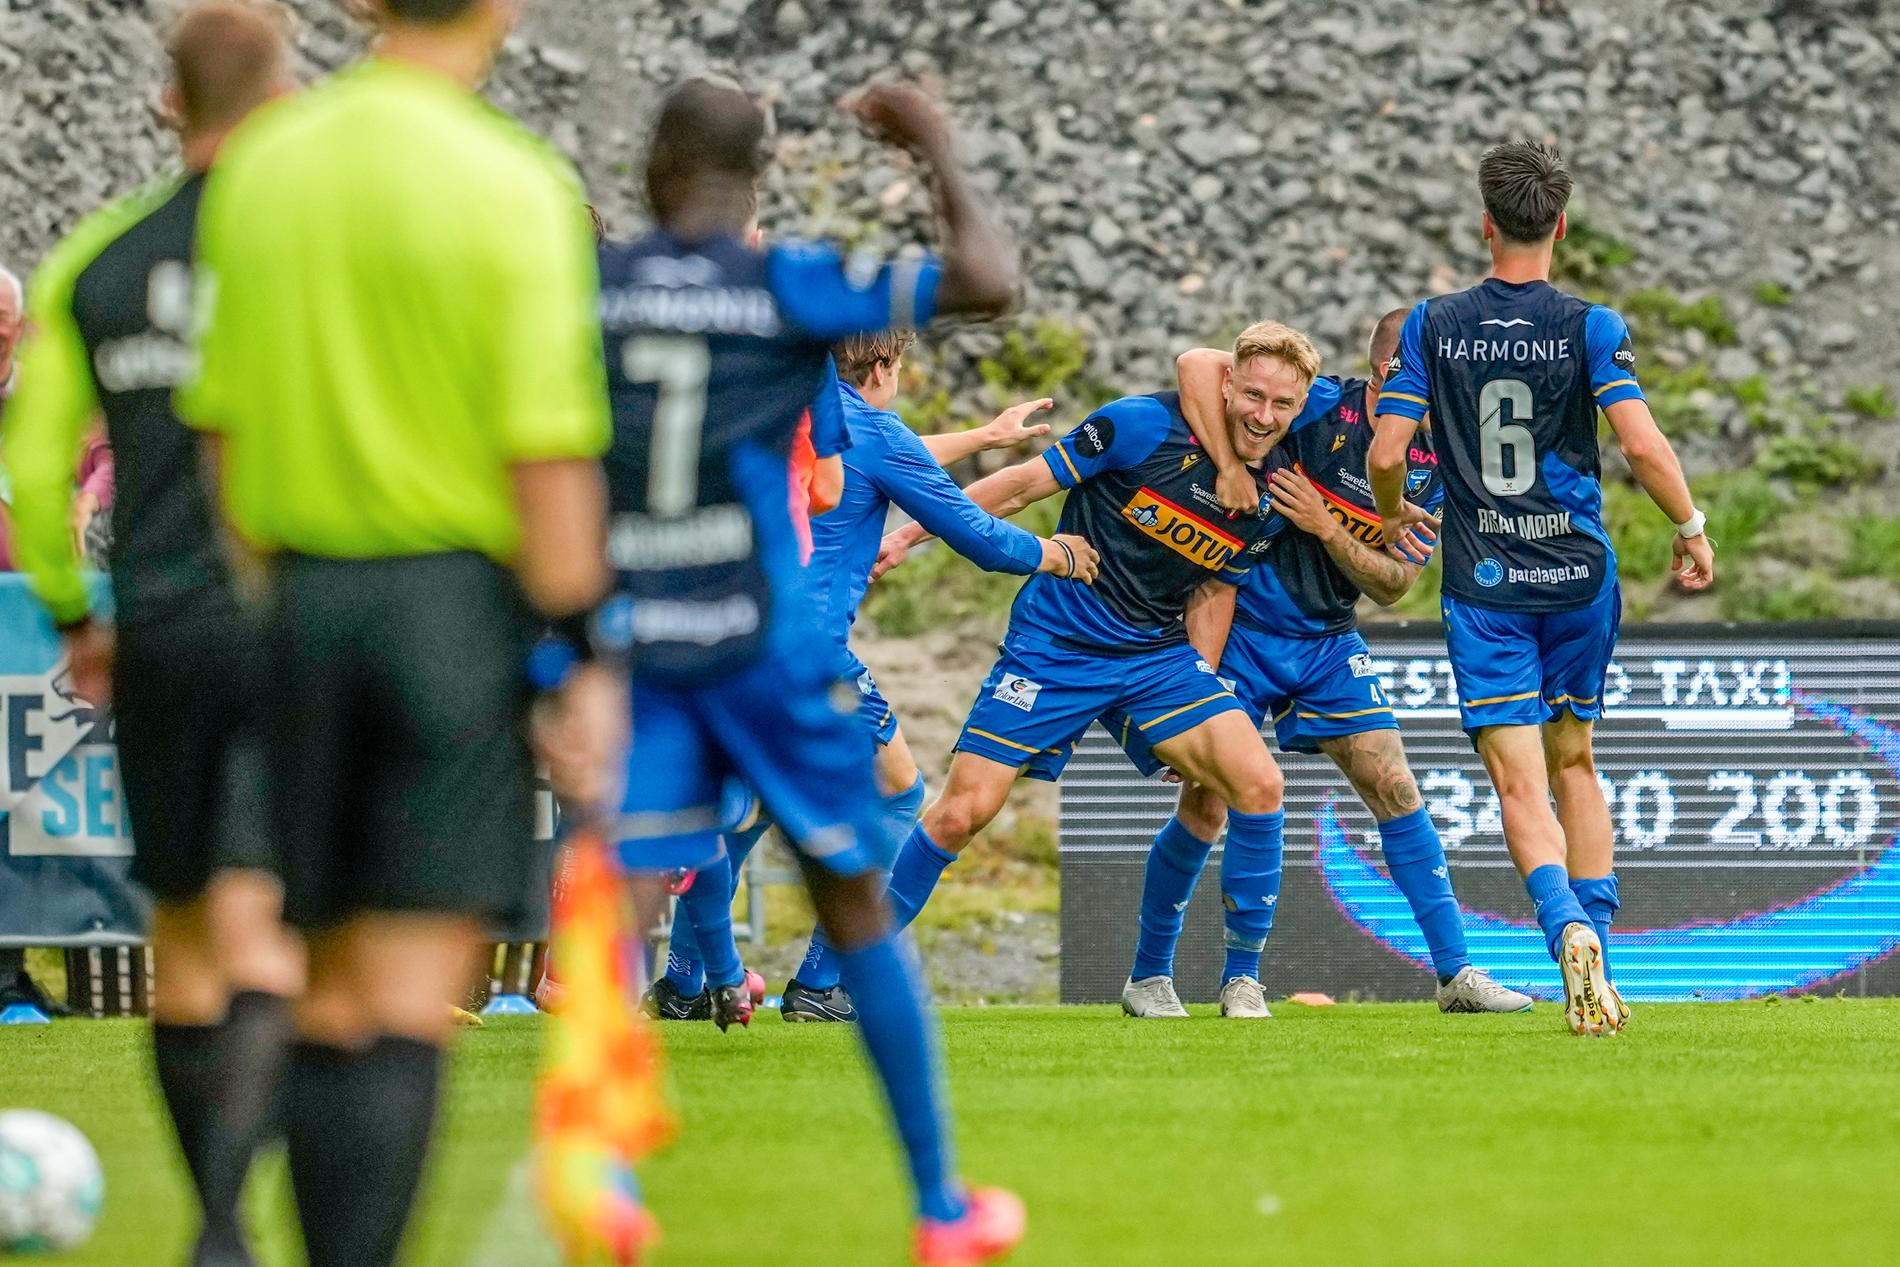 And the victory fell to Molde after a supernatural goal in extra time